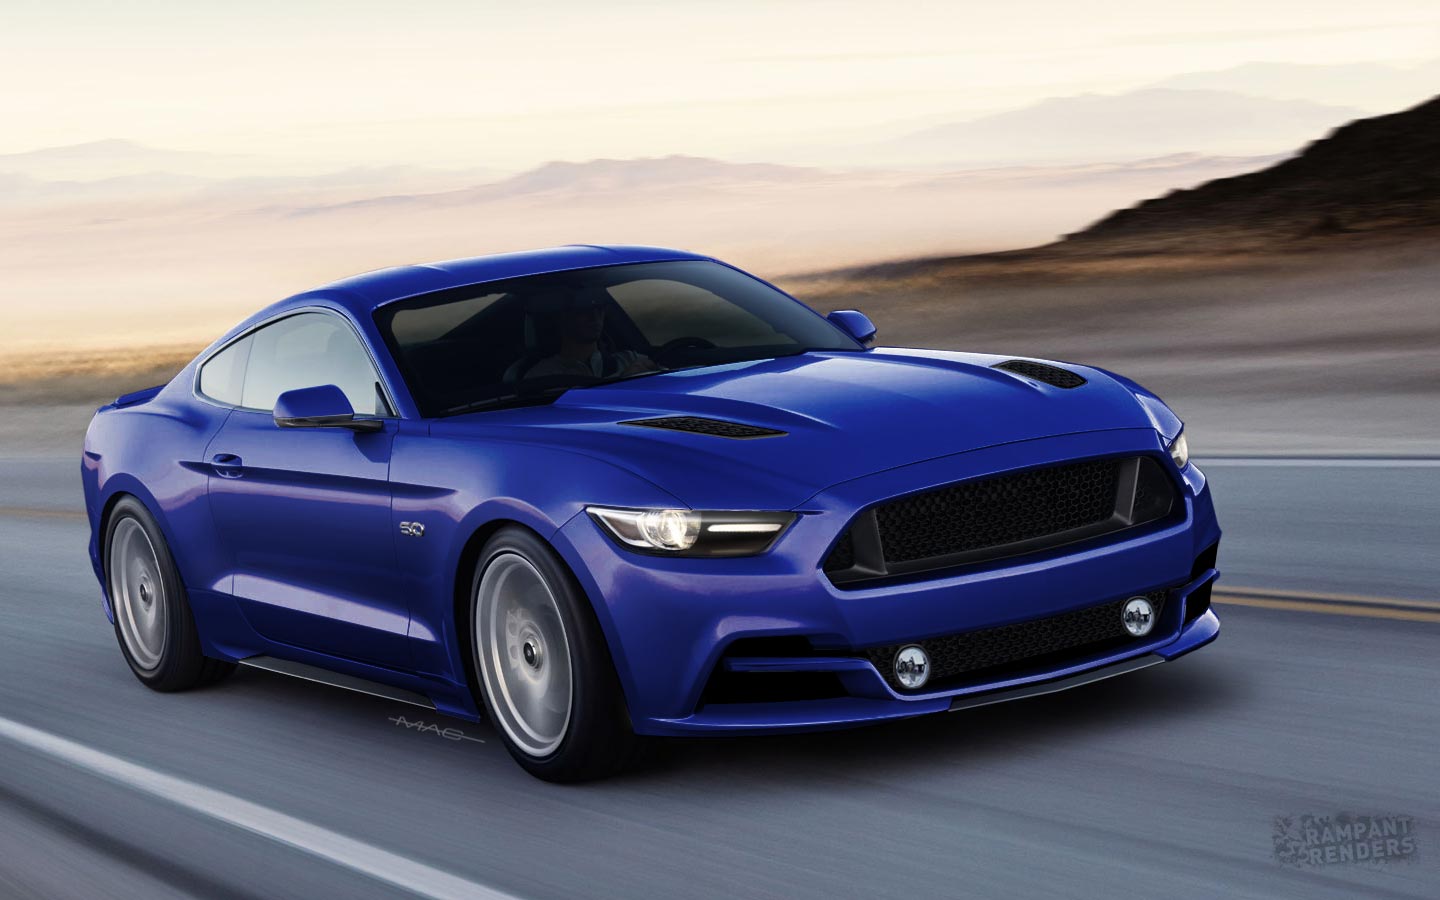 2015-ford-mustang-rendered-with-slightly-different-face-rear-photo-gallery_6.jpg